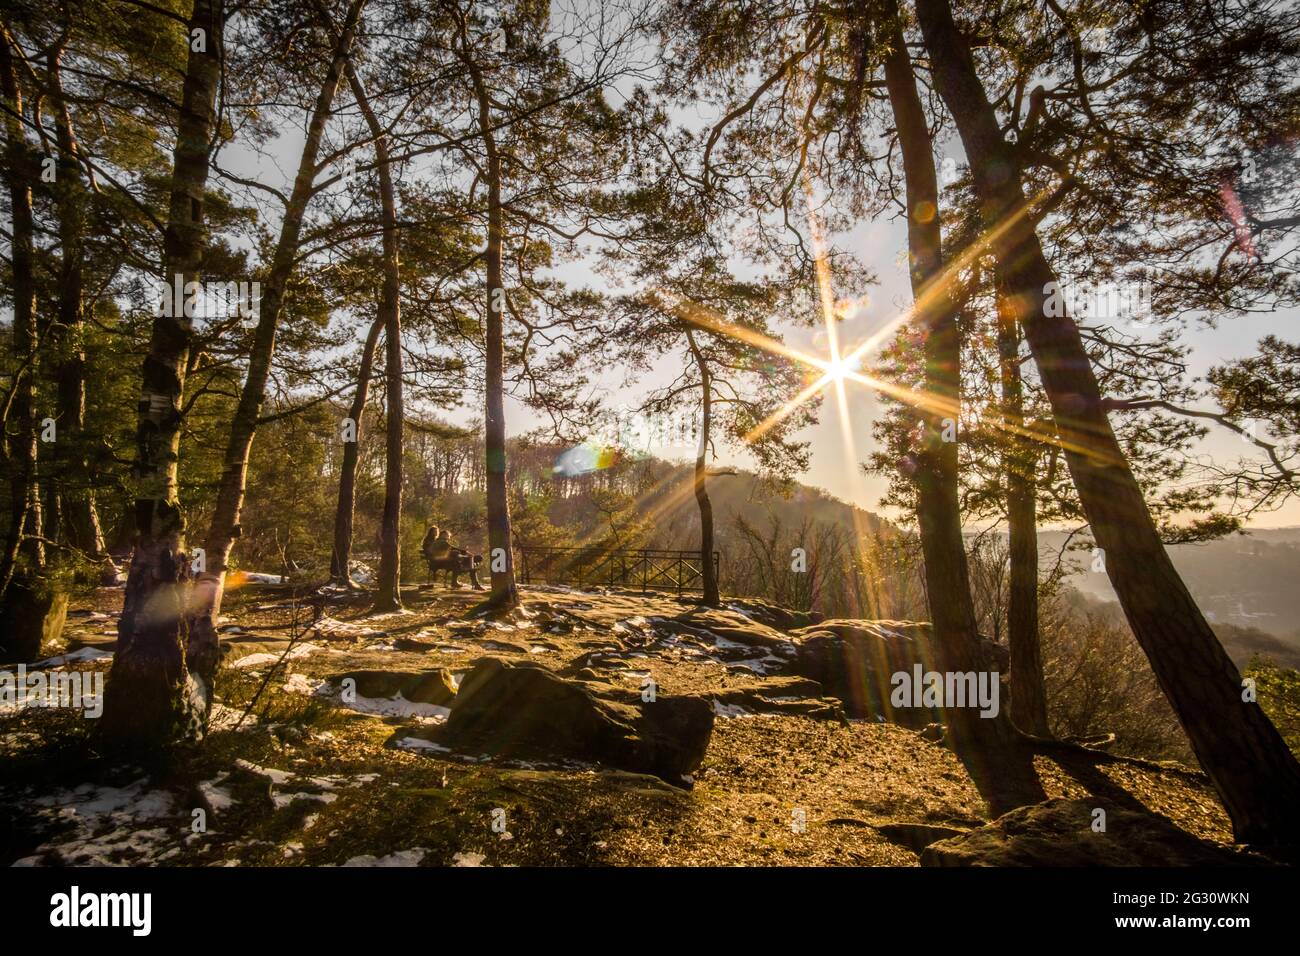 winter landscape in forest with couple sitting on bench at sunset in golden light, Mullerthal, Luxembourg Stock Photo